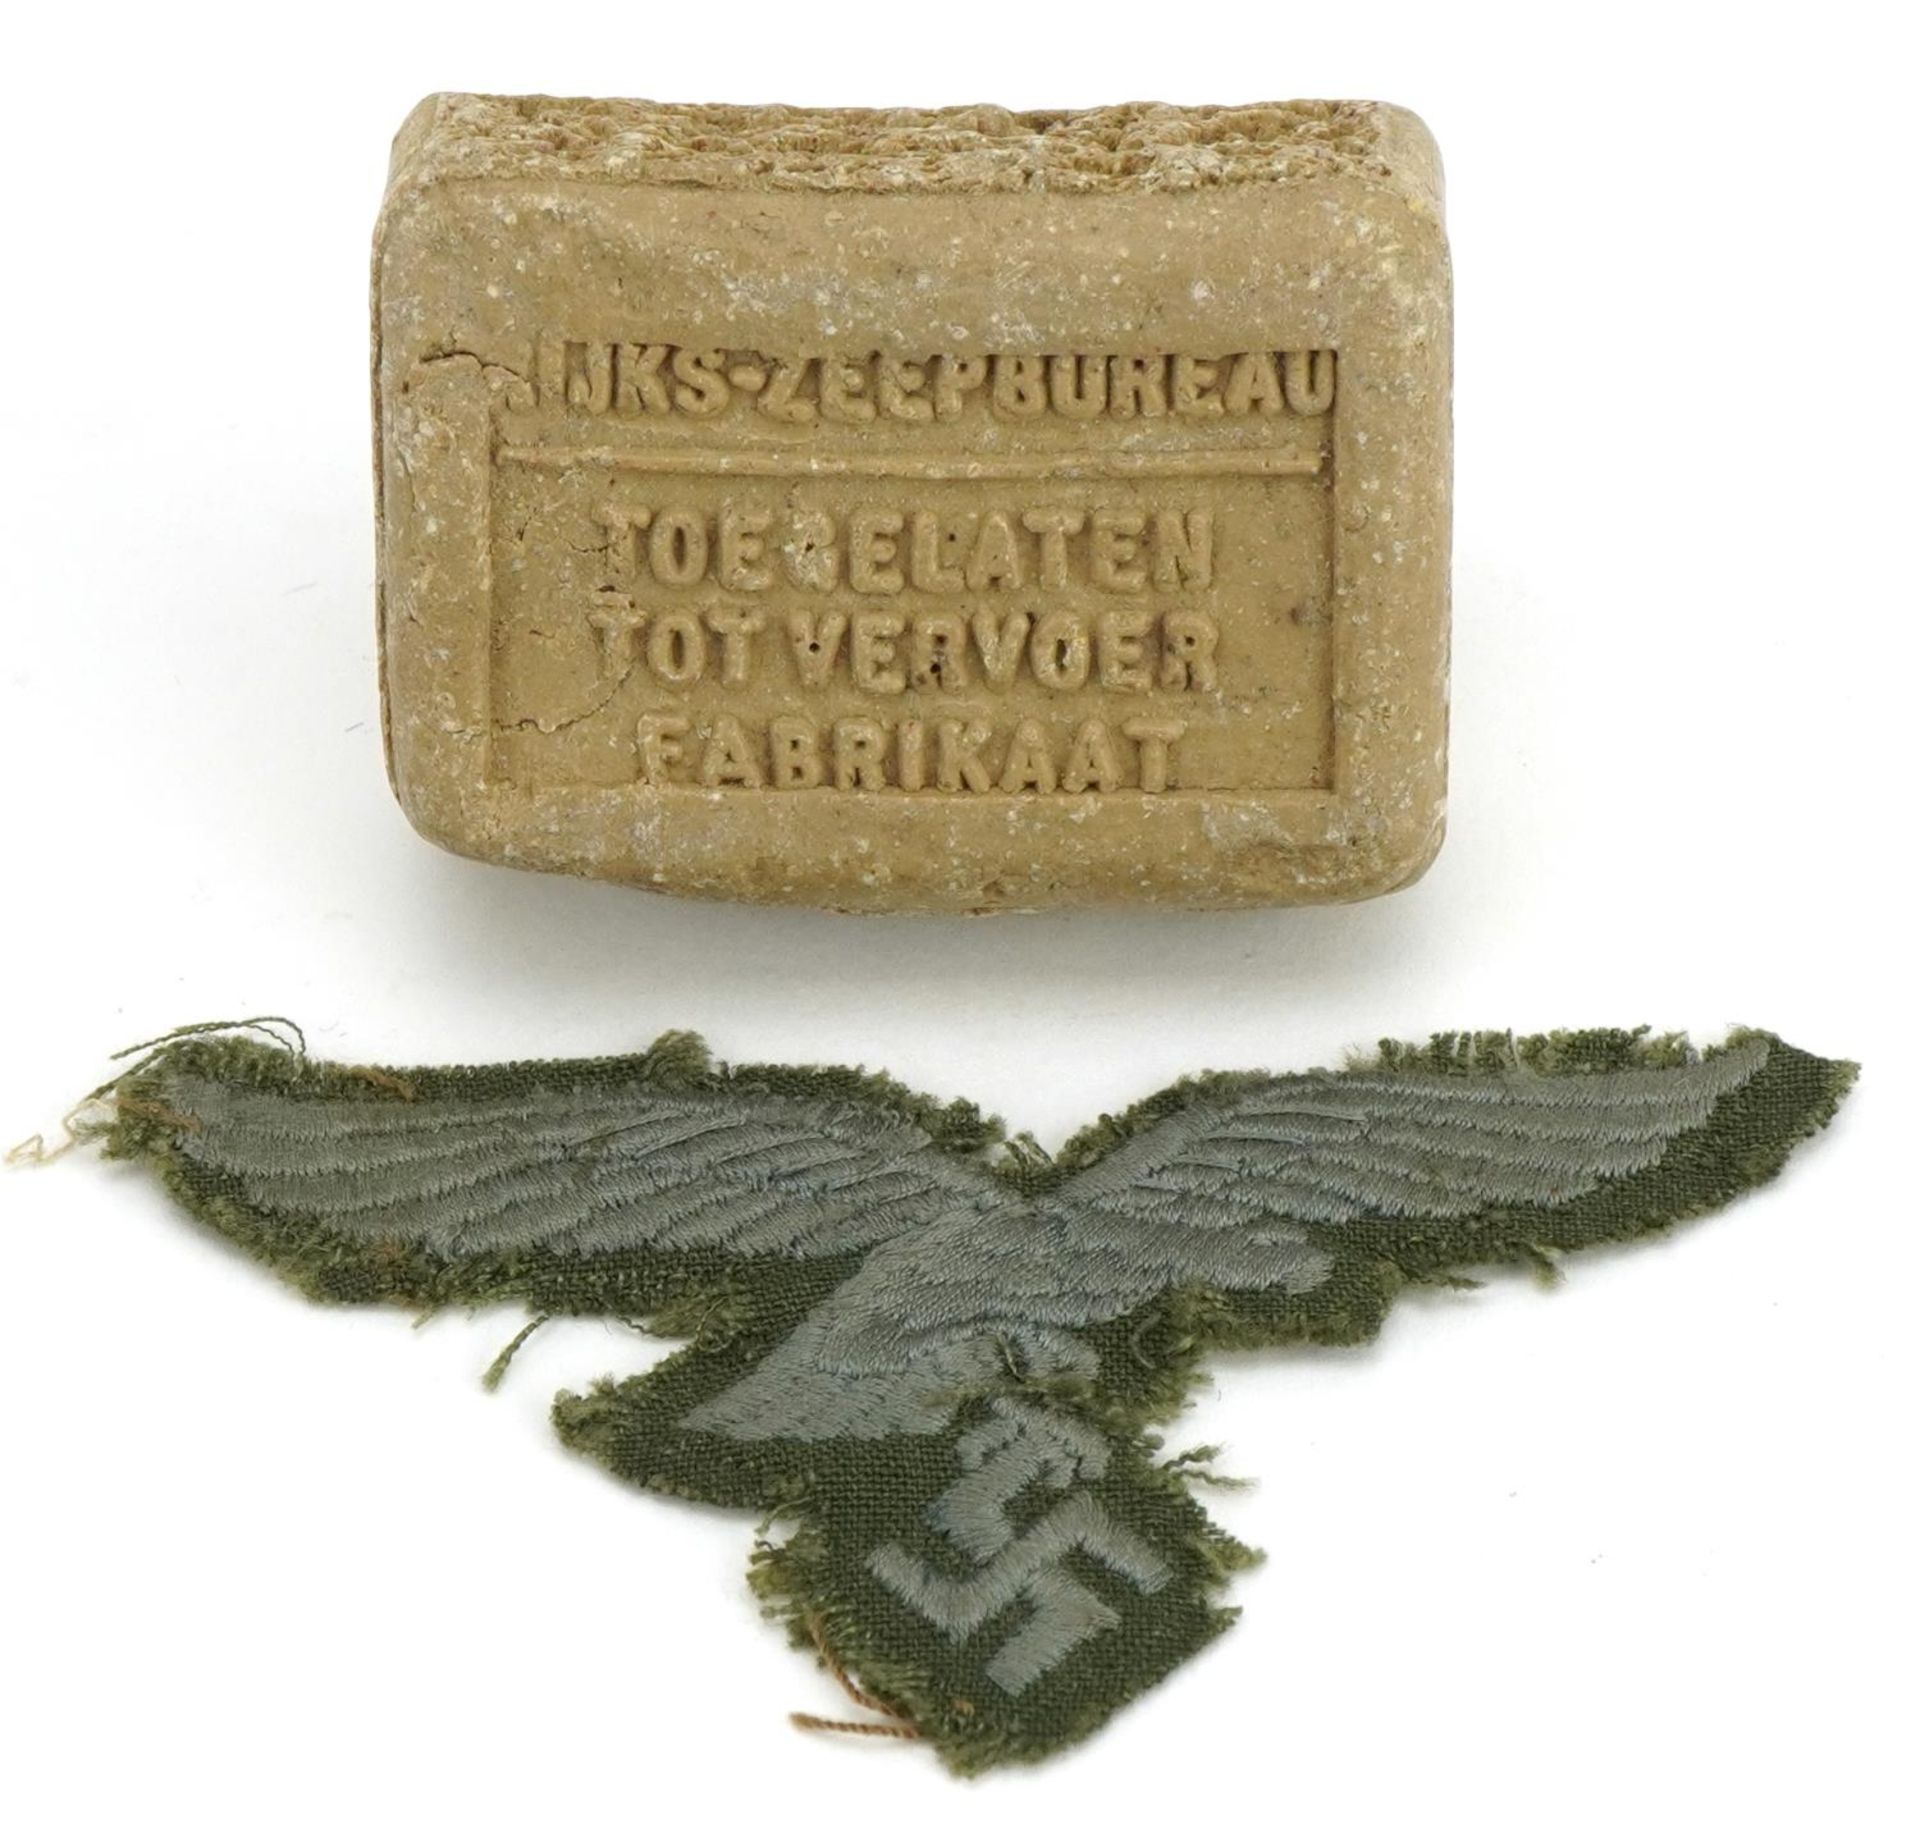 German military interest cloth badge and a bar of soap